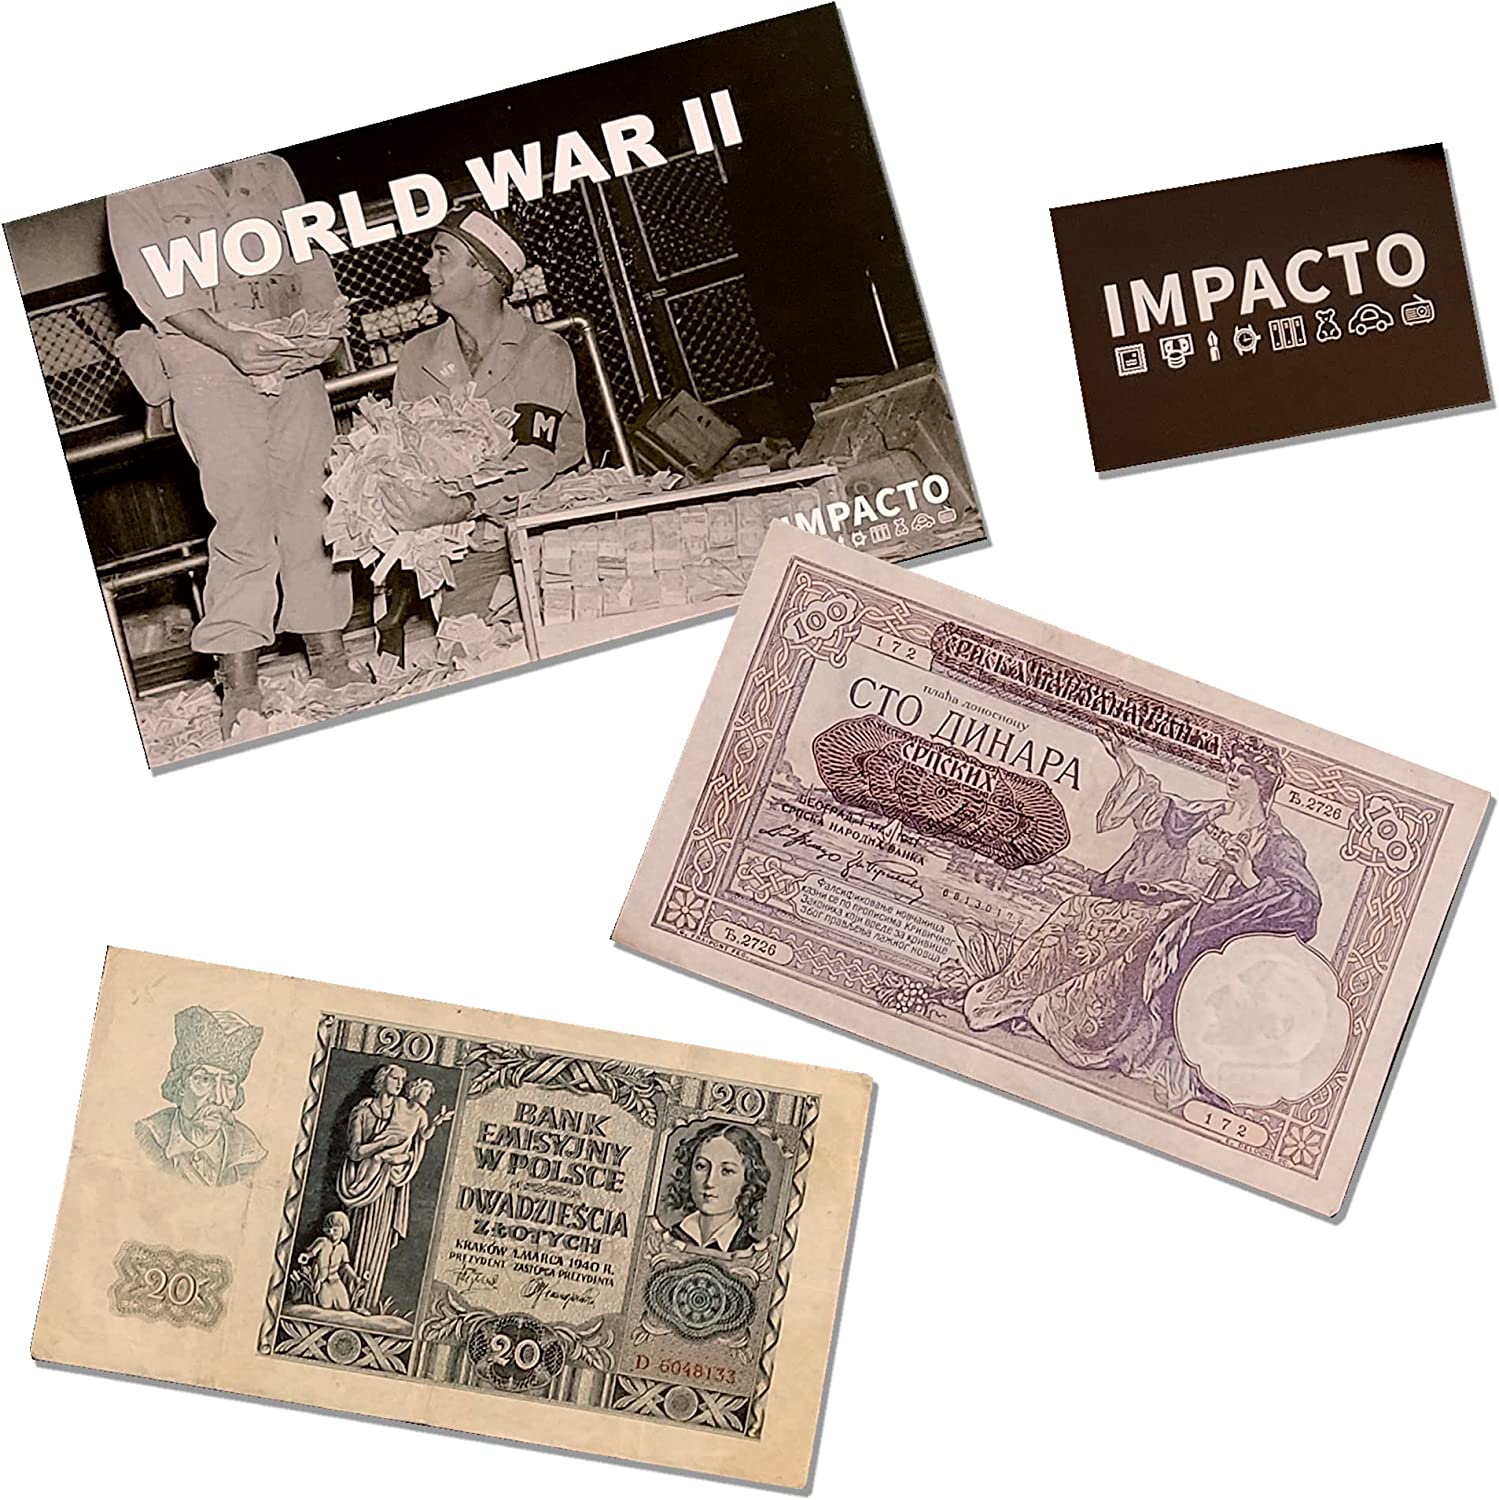 2 Banknotes that were used during the World War 2 by German to invade foreign territories (1939-45) - The Third Reich Invasion Money, Certificate of Authenticity included.